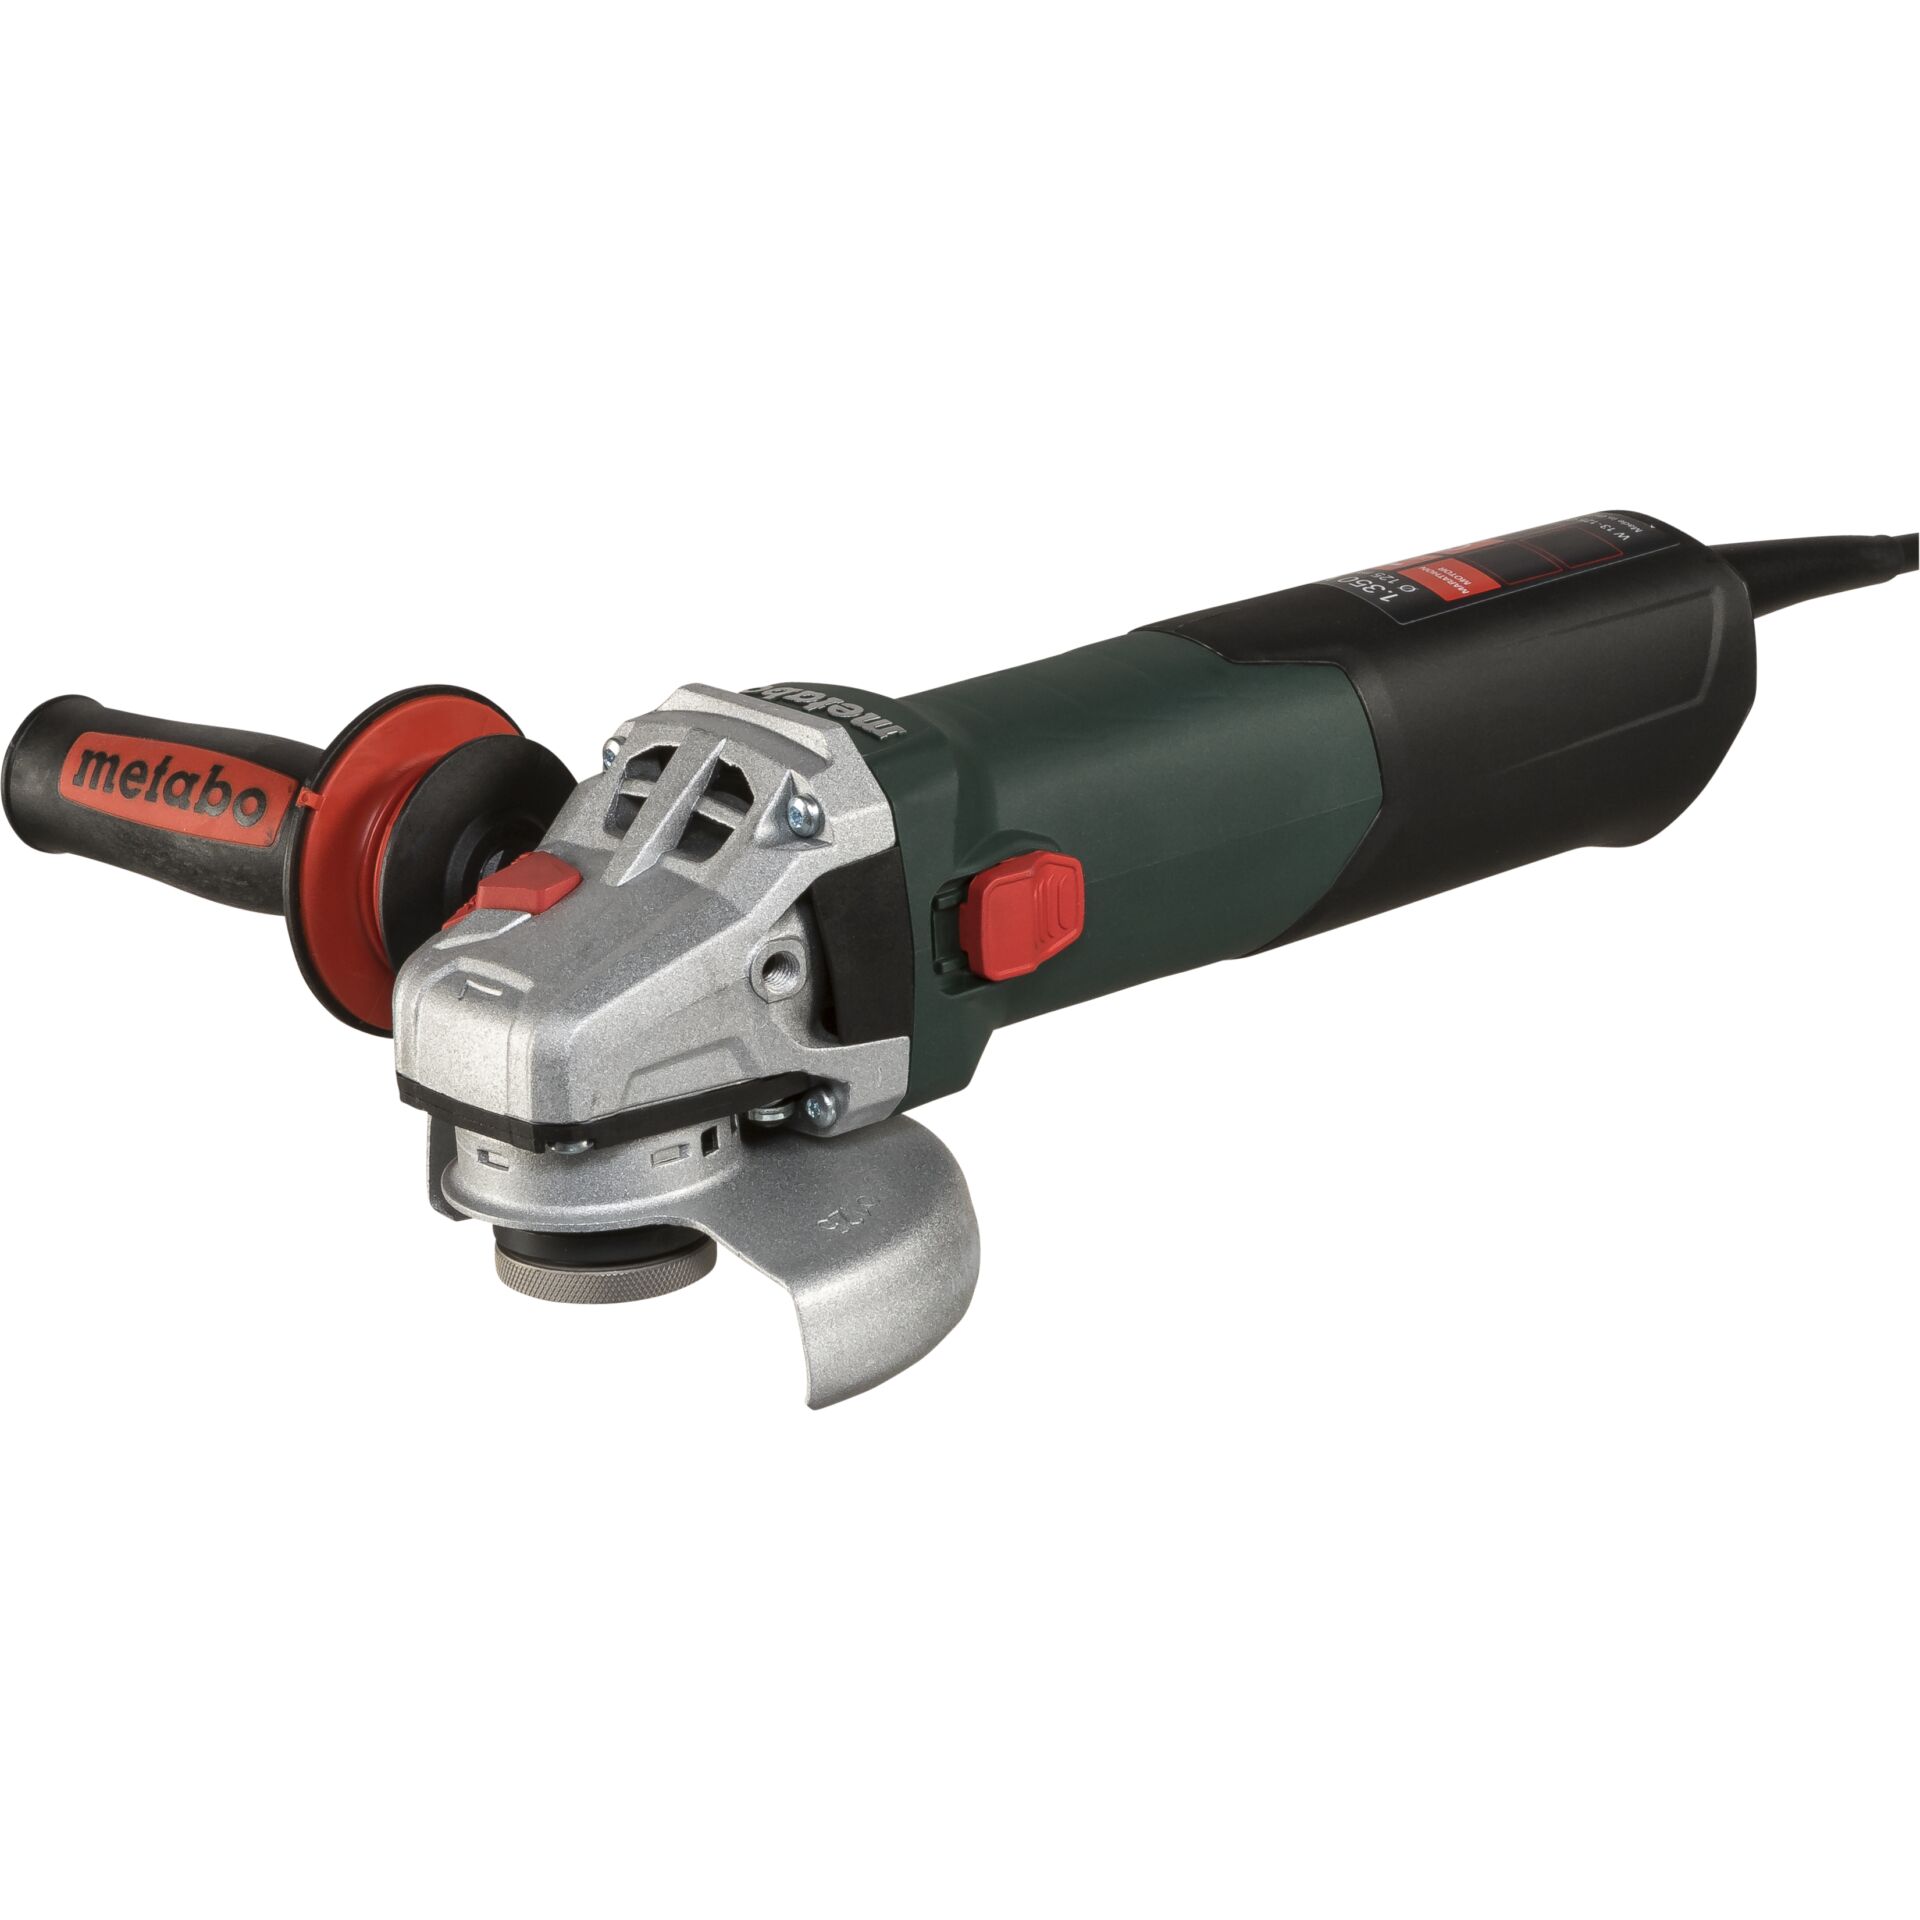 Metabo W 13-125 Quick Angle Grinder